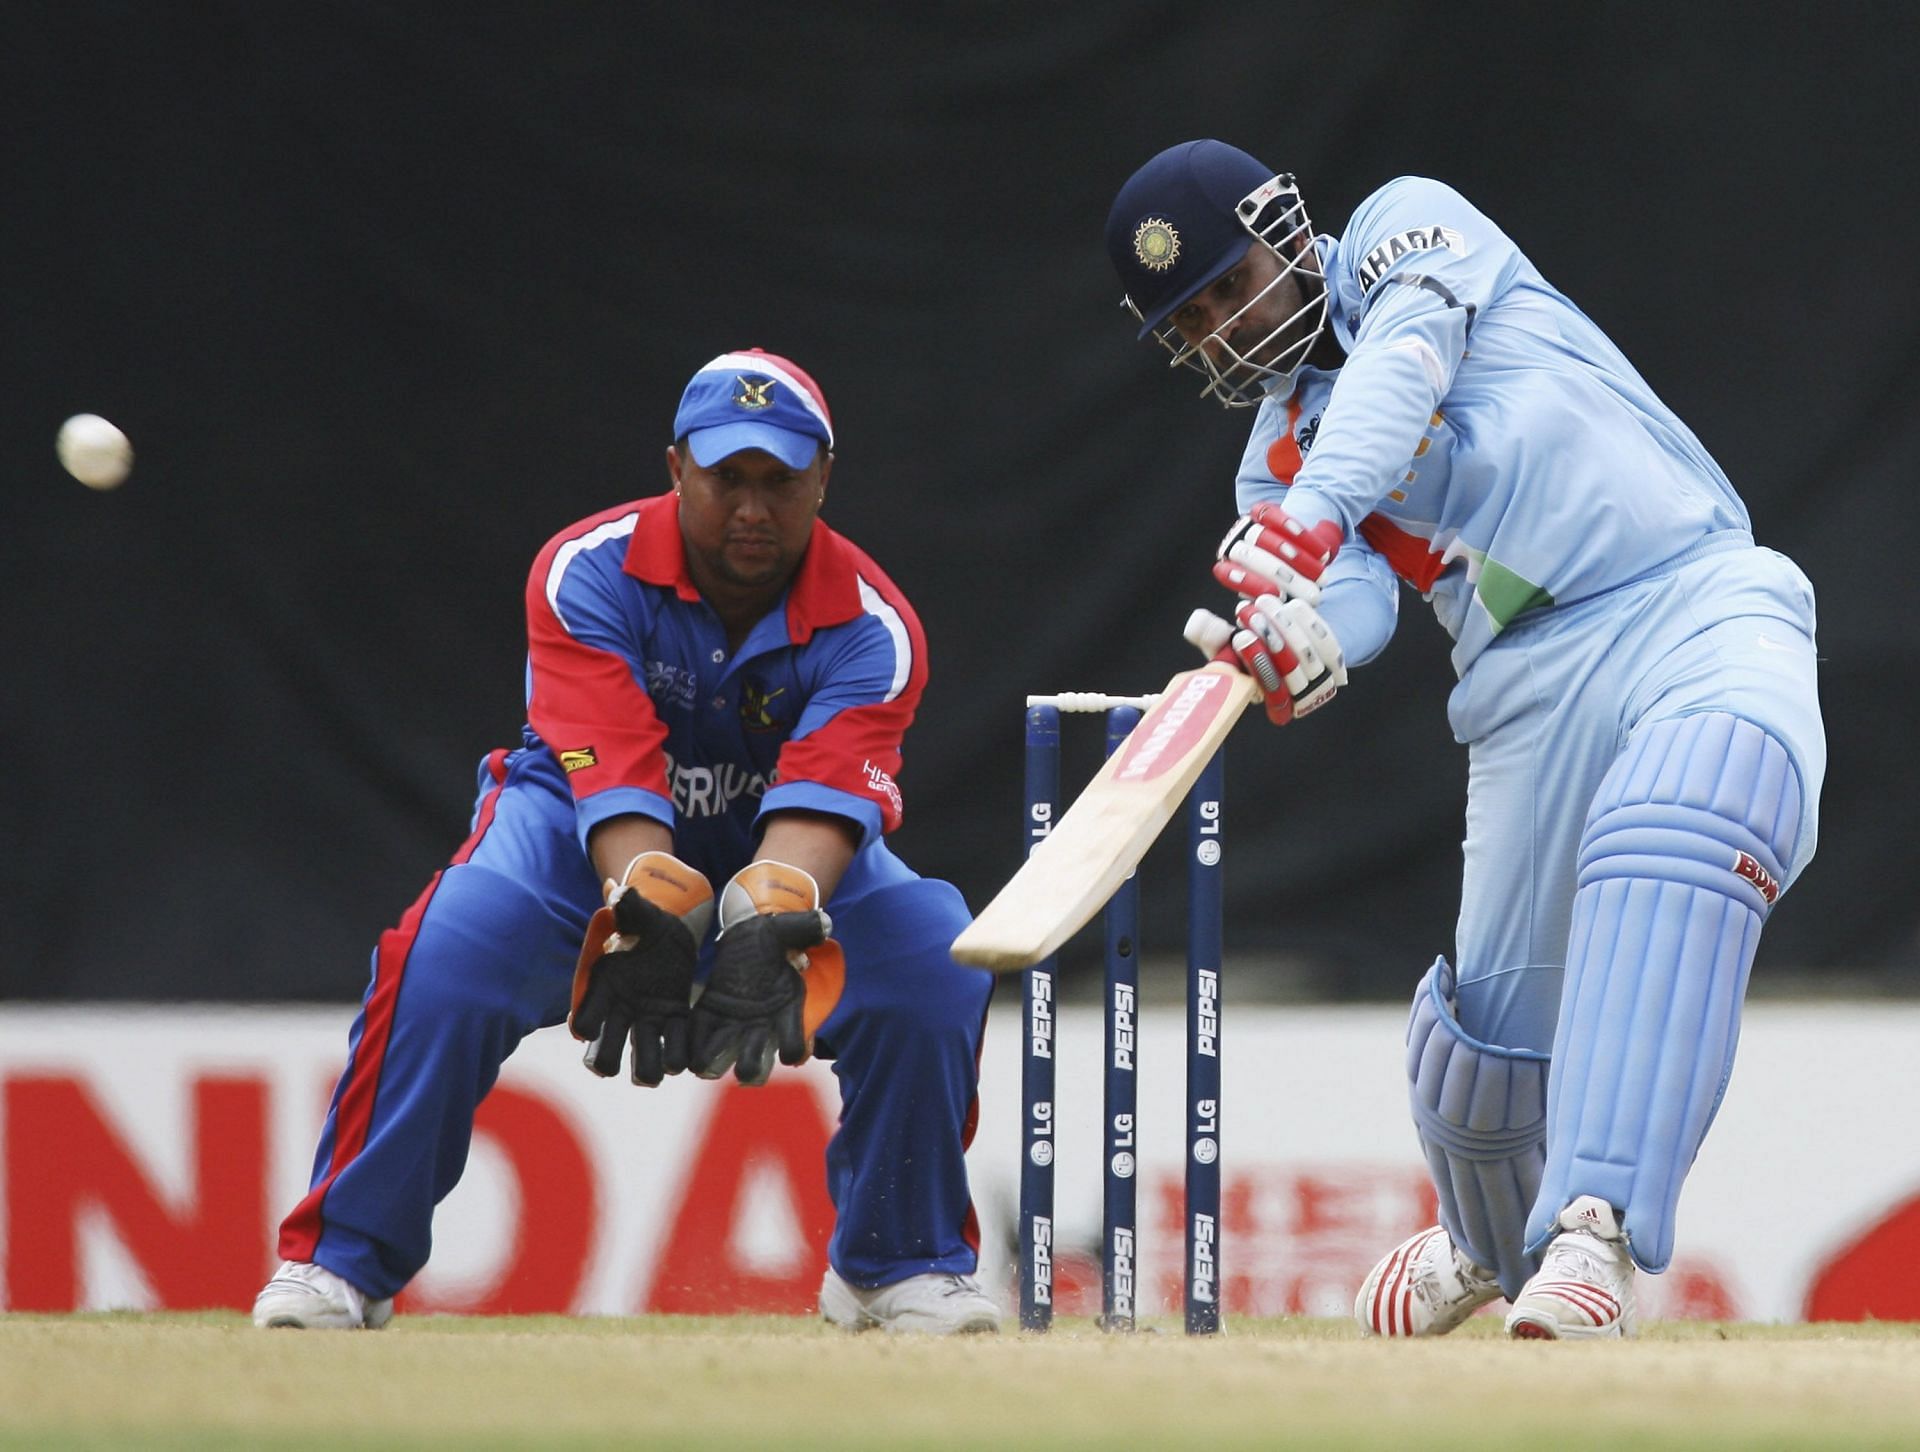 Sehwag tore into Bermuda&#039;s bowling attack